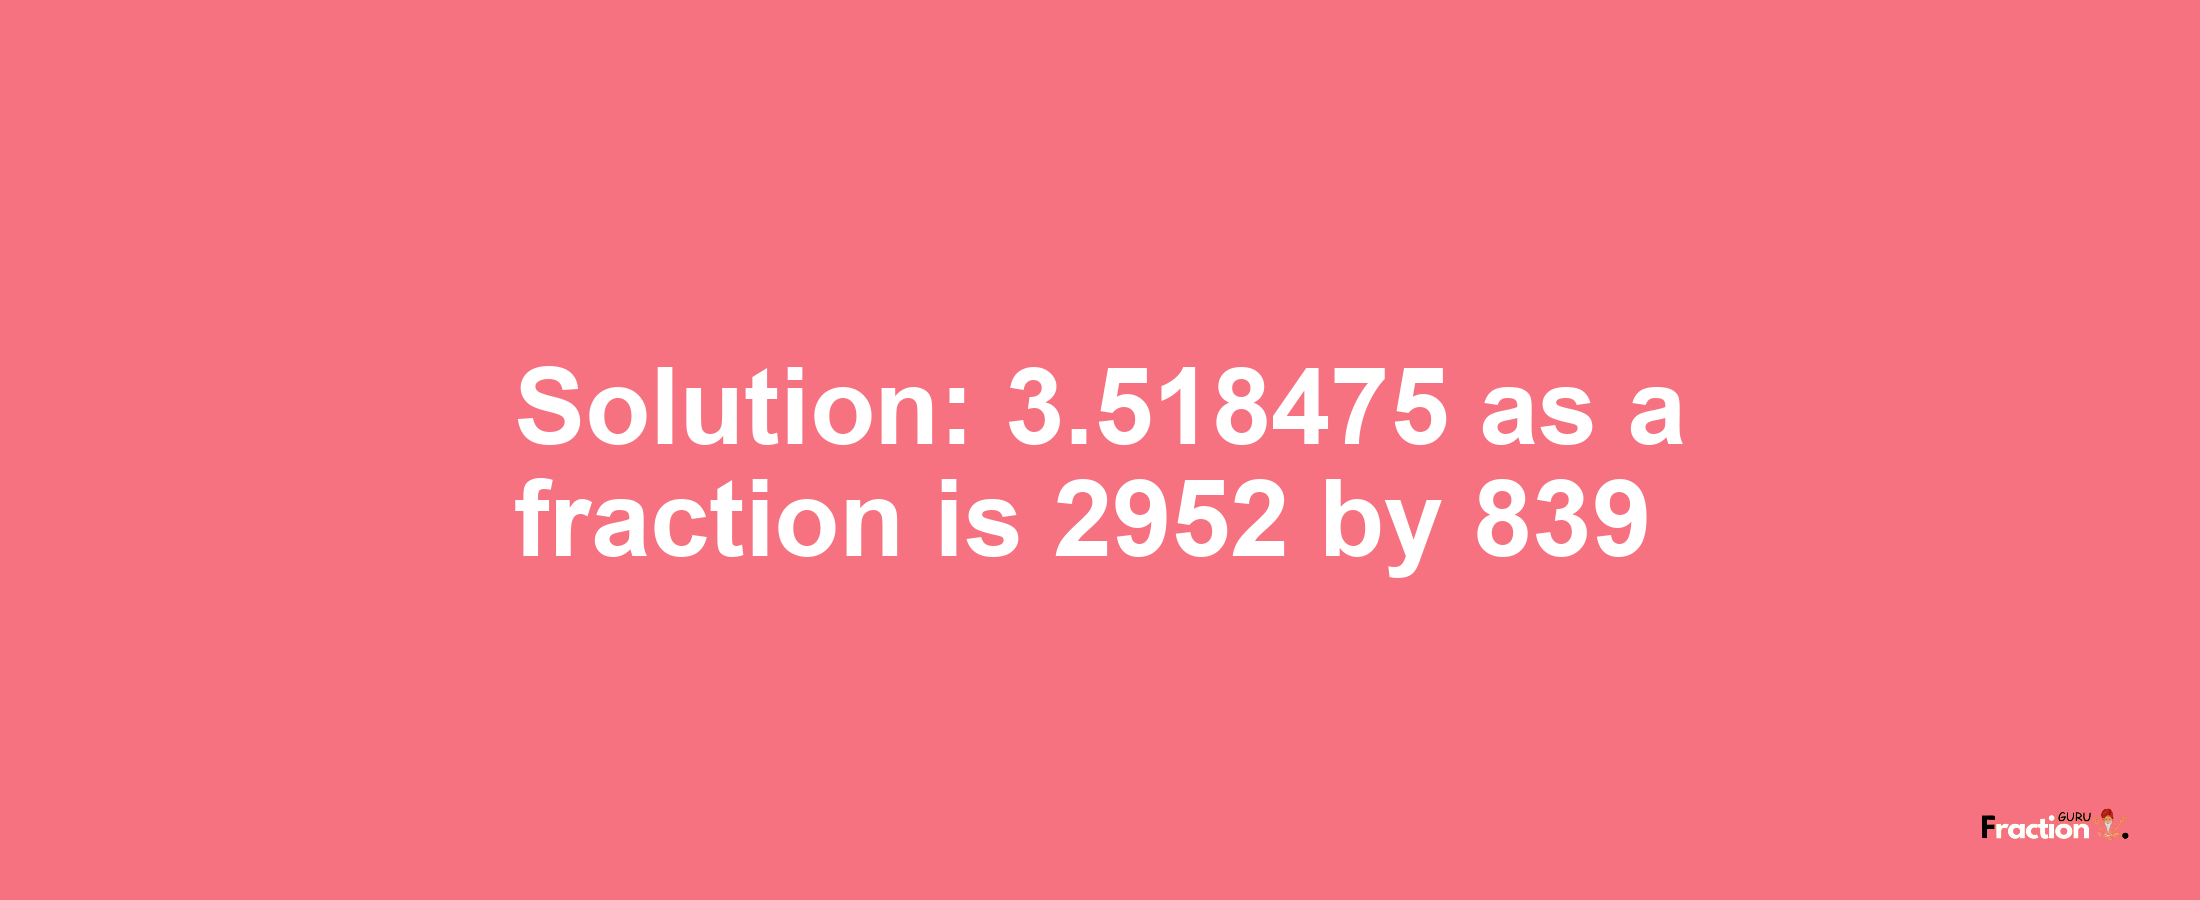 Solution:3.518475 as a fraction is 2952/839